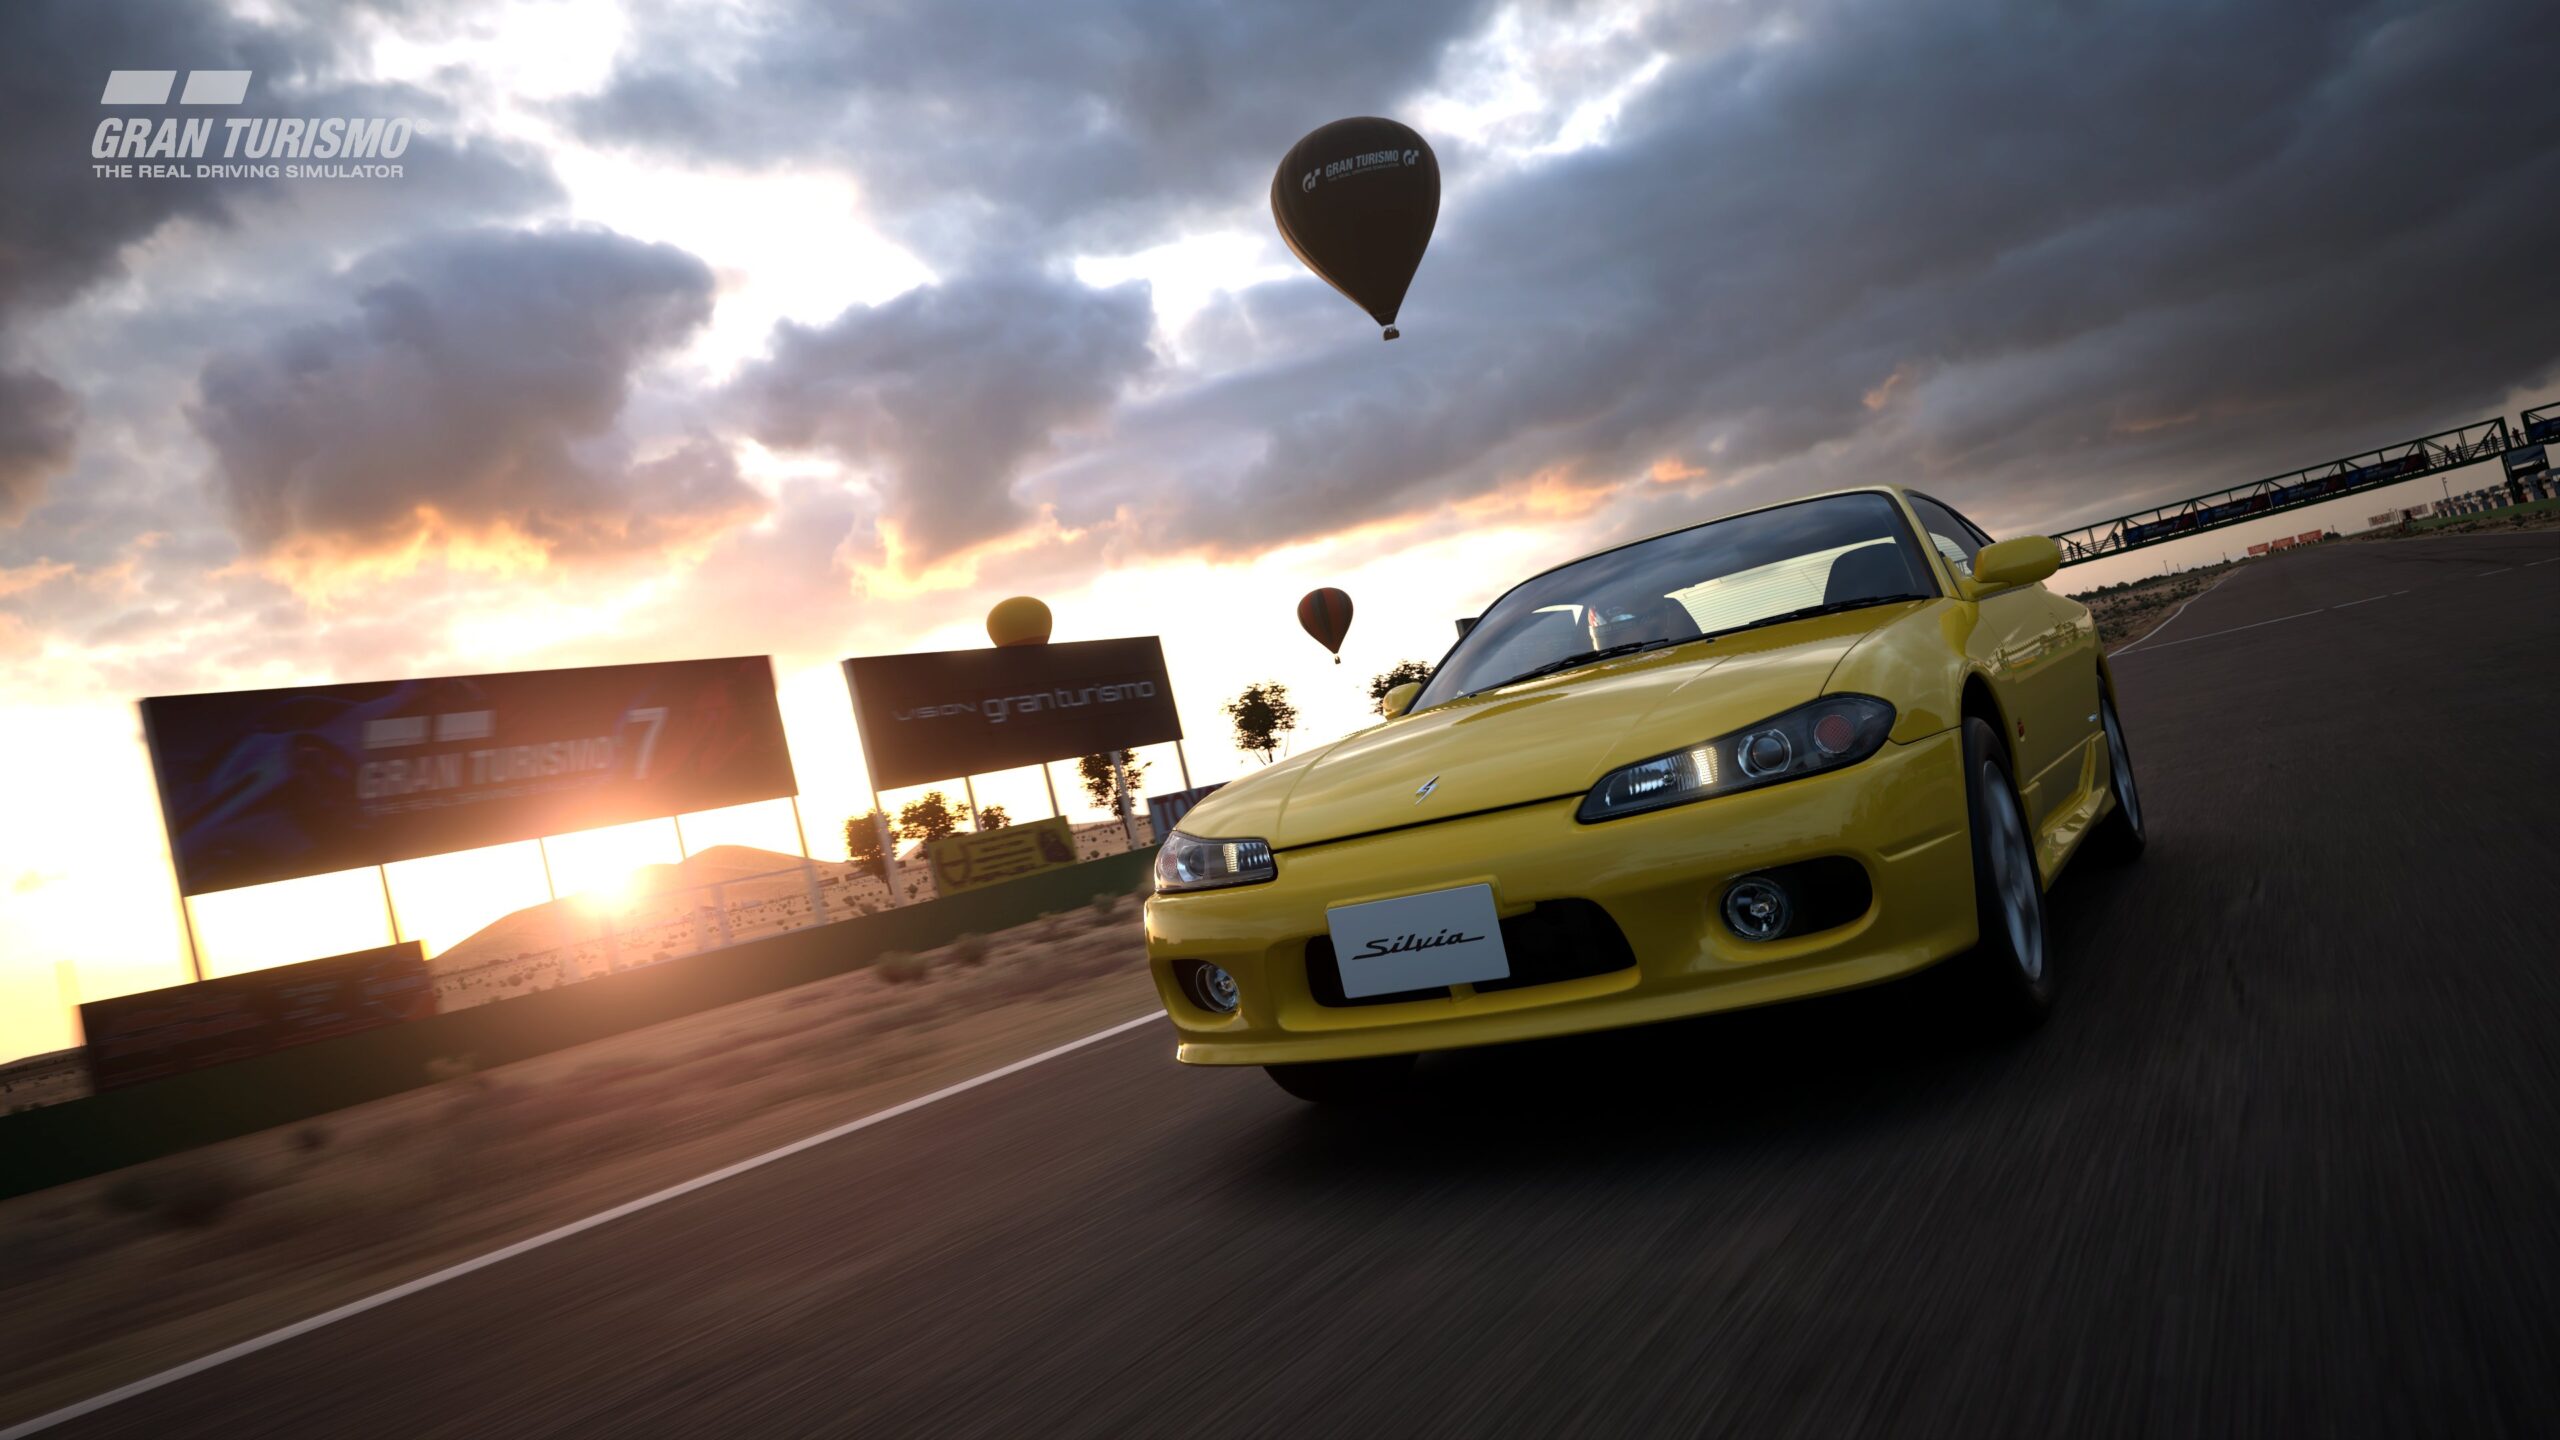 Horizon Forbidden West And Gran Turismo 7 Have Dropped To Their